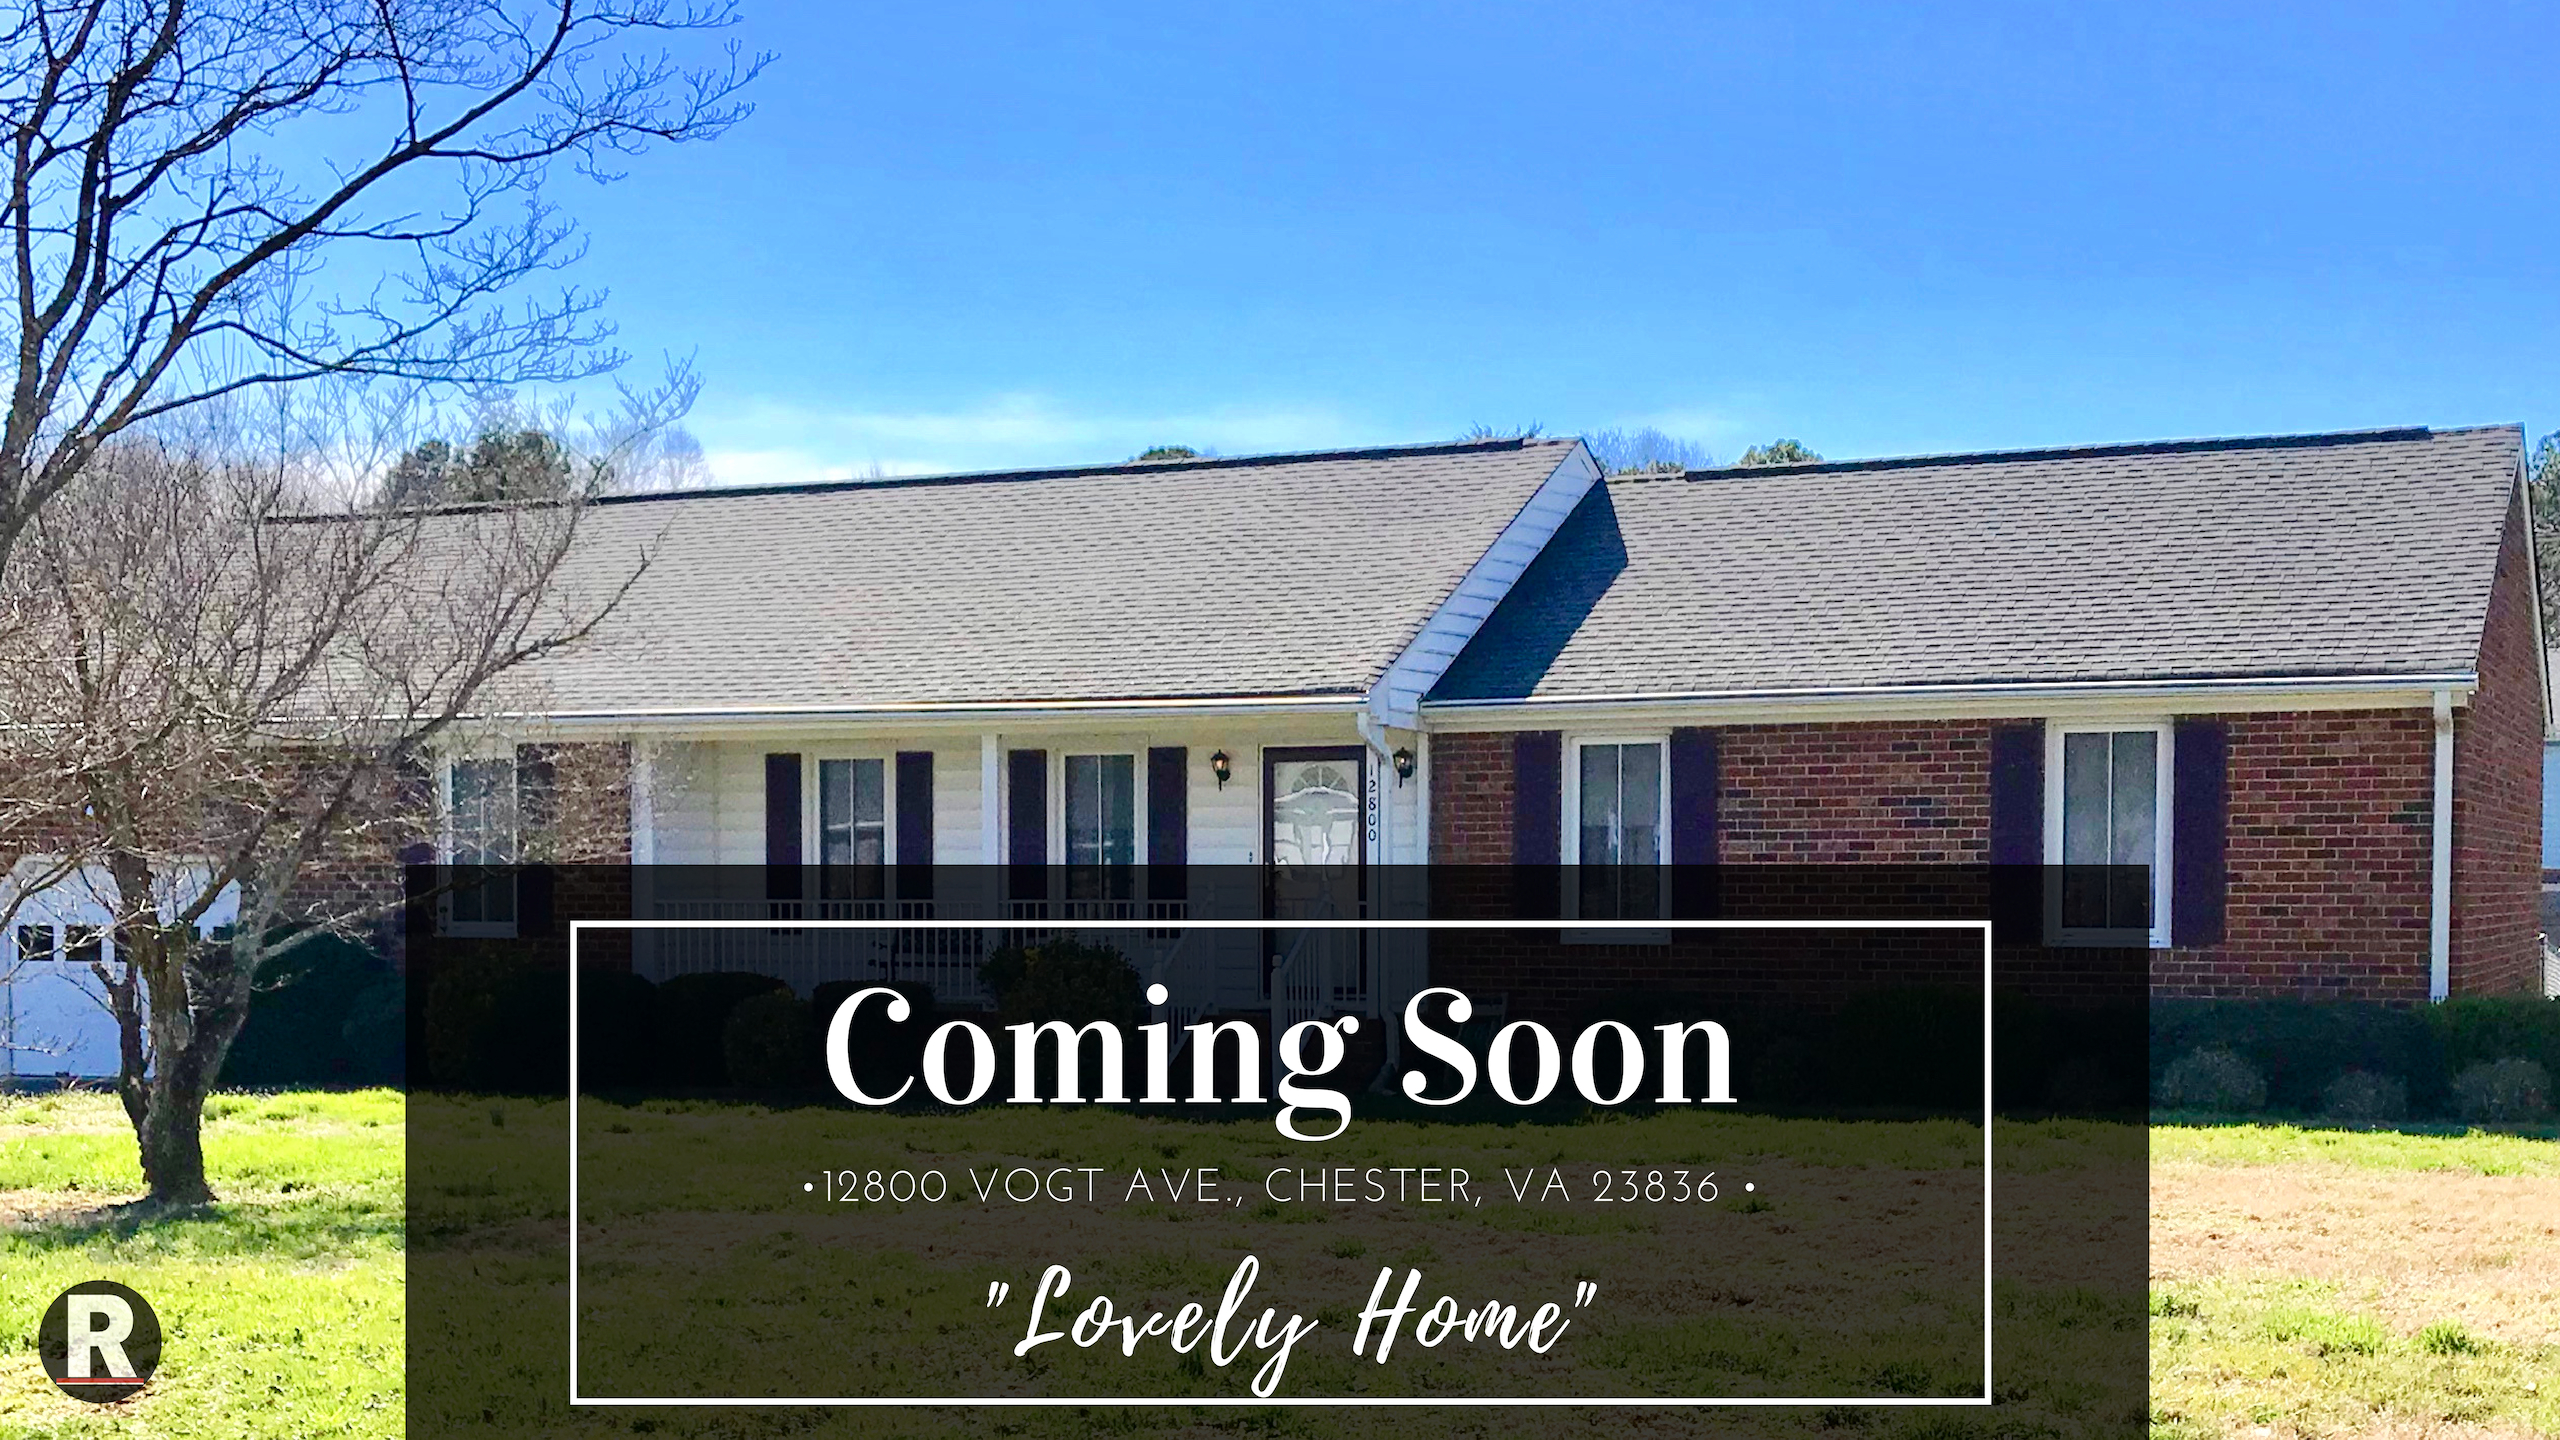 Coming Soon! 12800 Vogt Ave., Chester, VA 23836